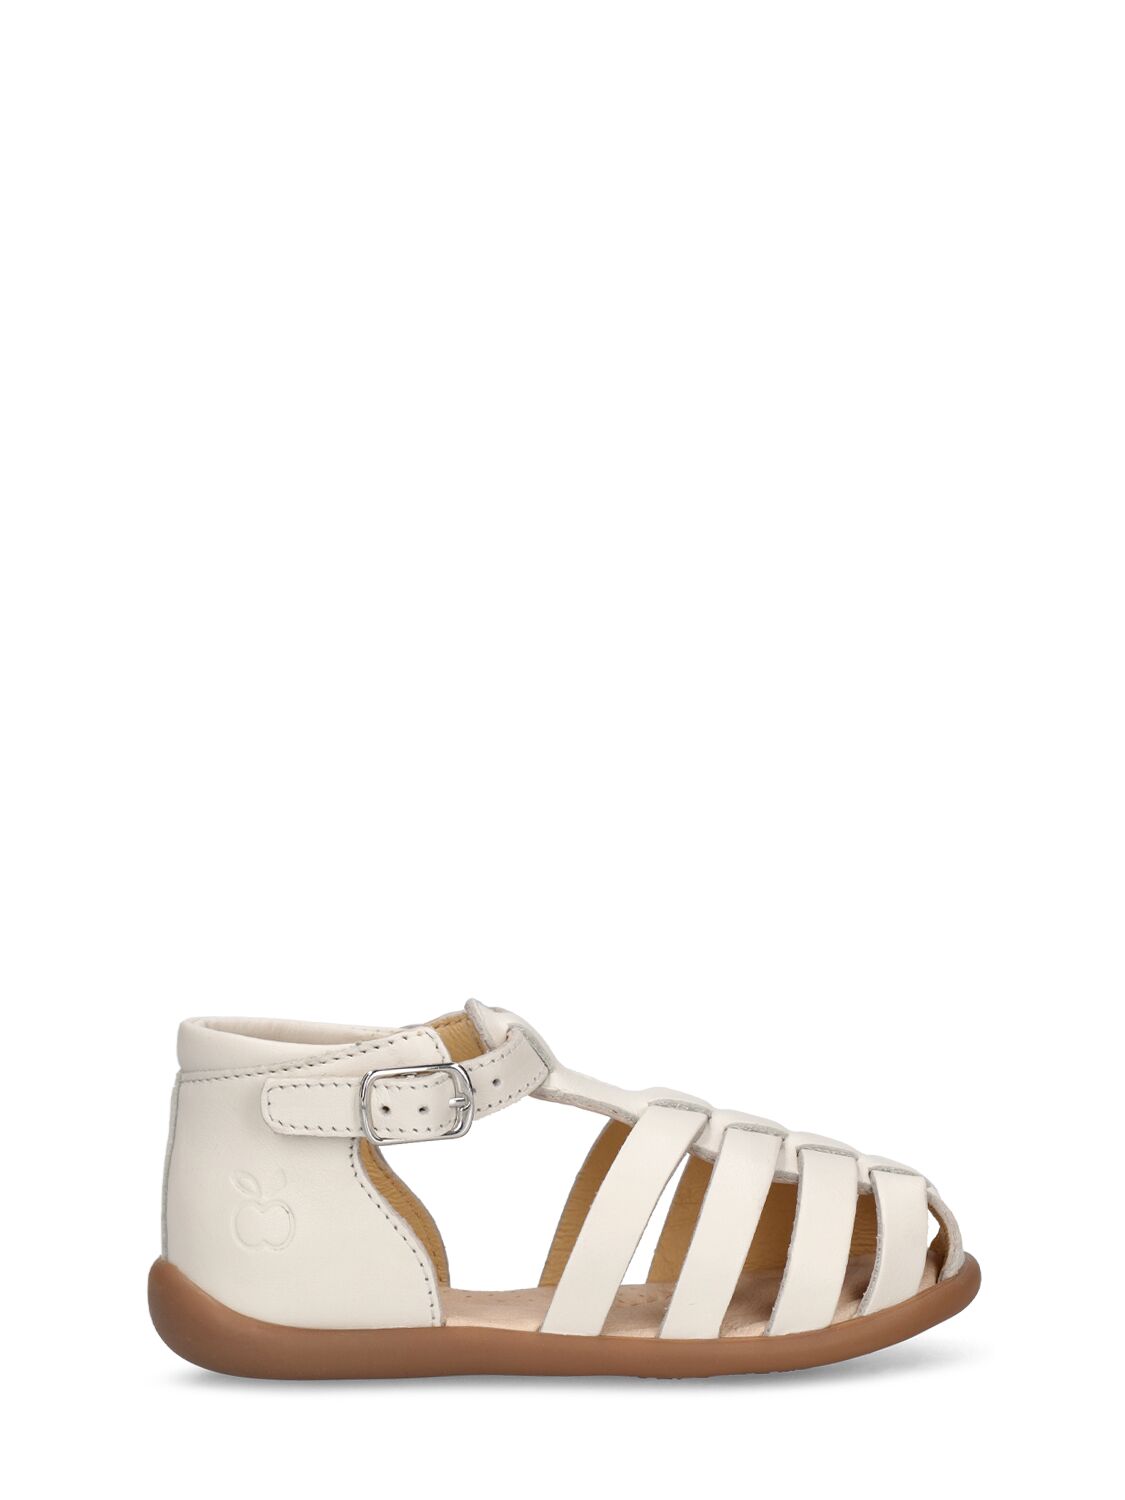 Pom D'api Kids' Nappa Leather Sandals In Off-white